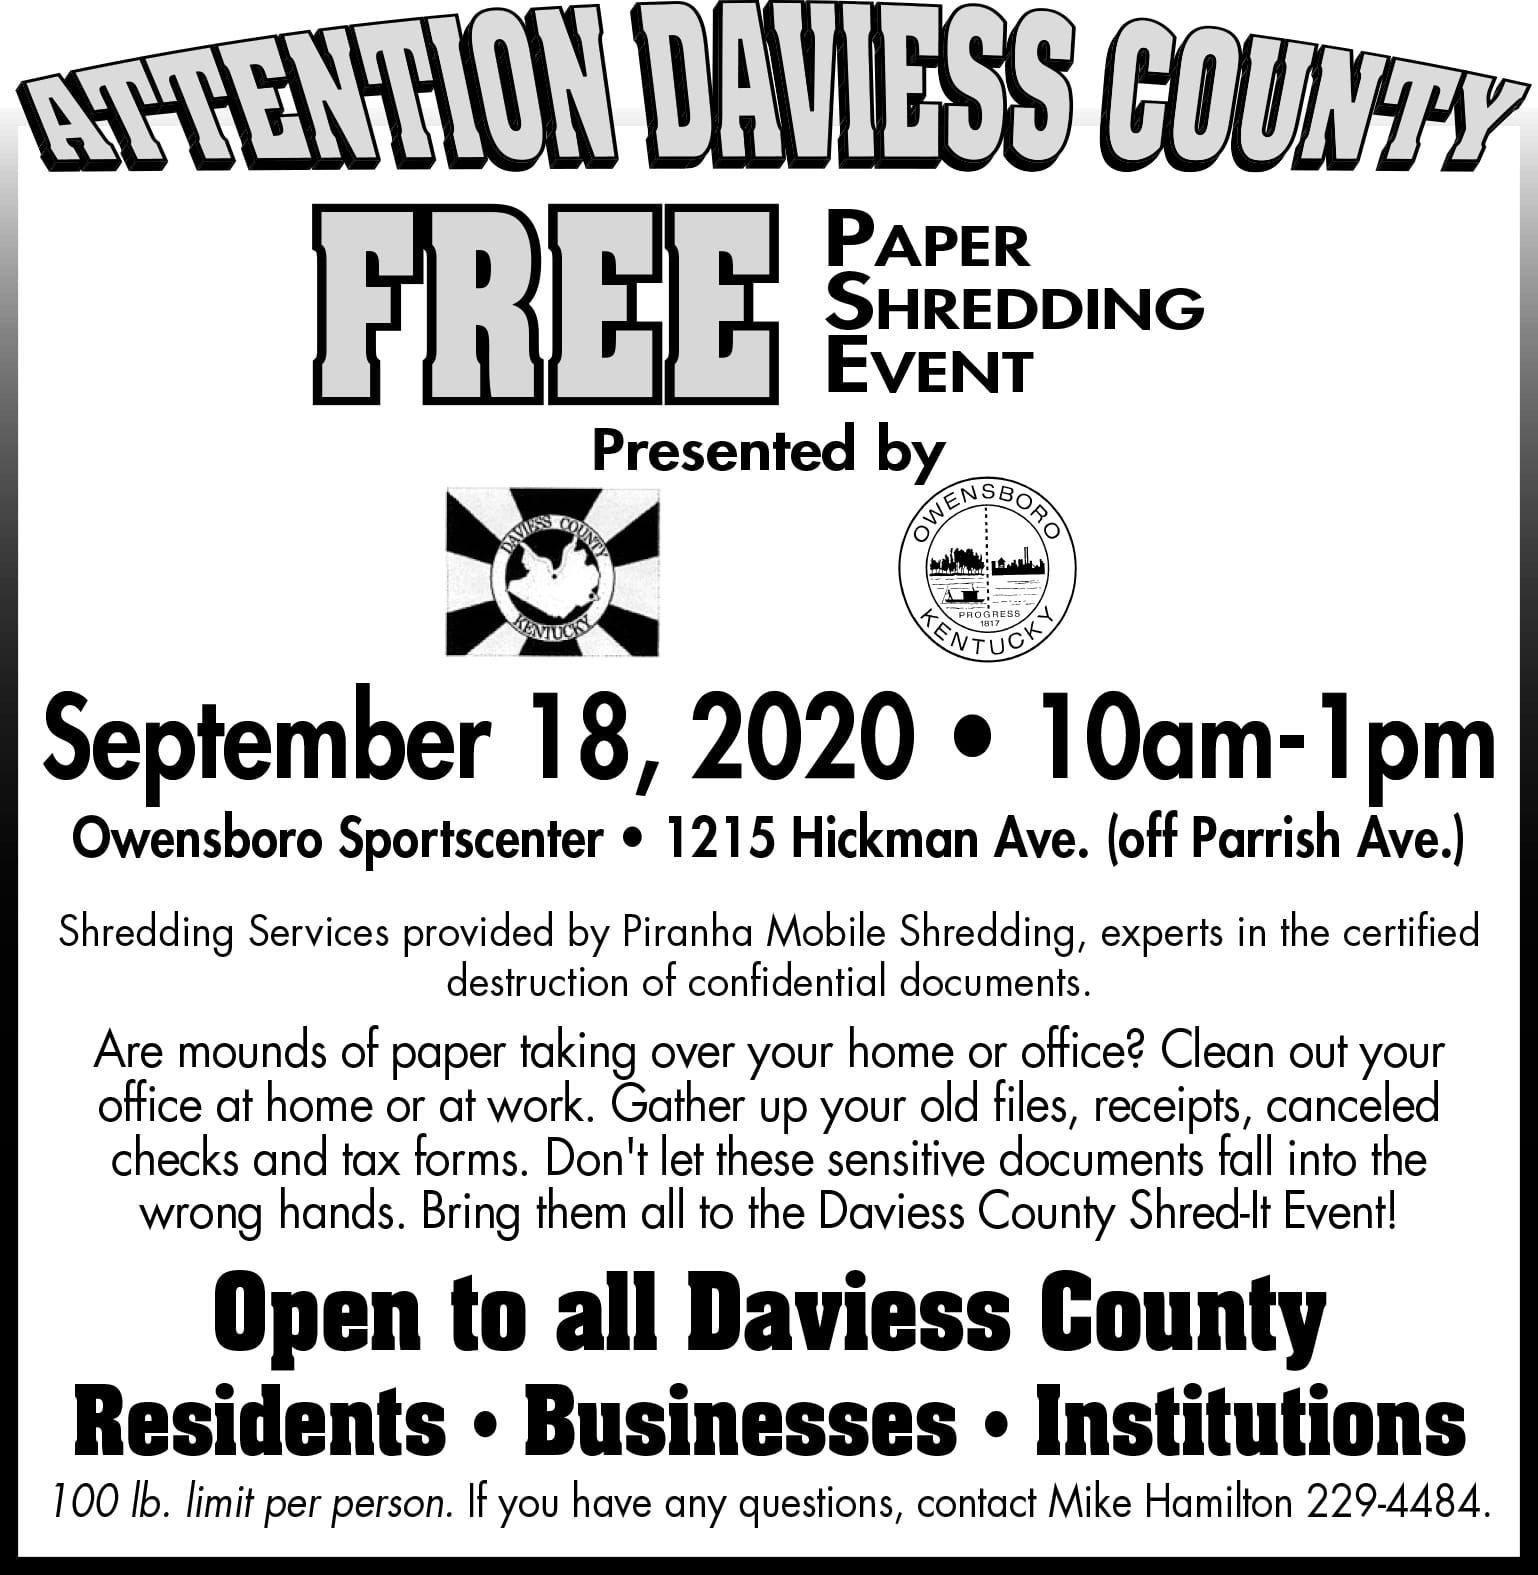 shred events near me